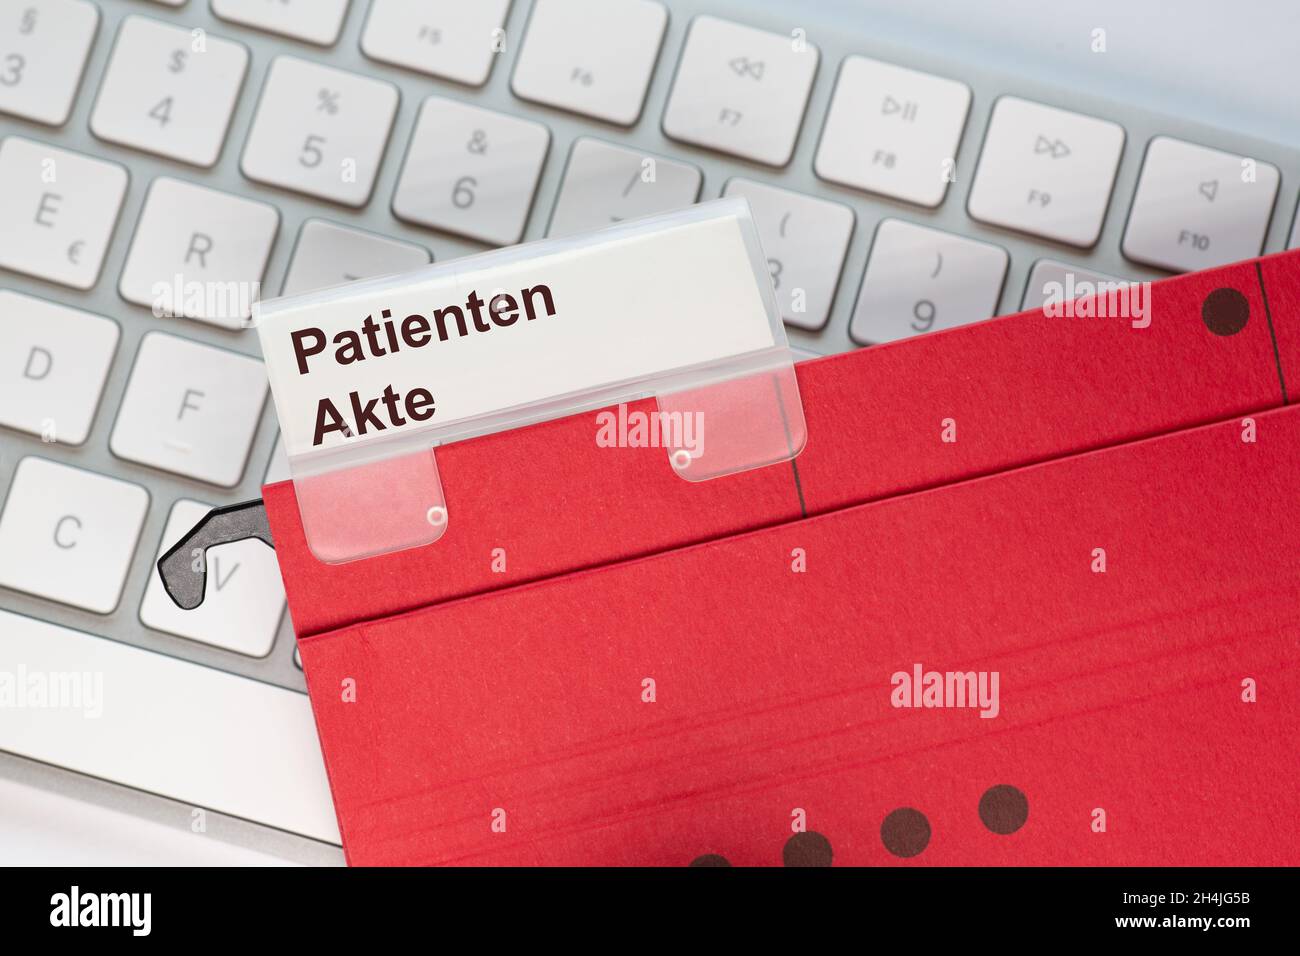 The German word for Patient file can be seen on the label of a red hanging folder. The hanging folder is on a computer keyboard. Stock Photo